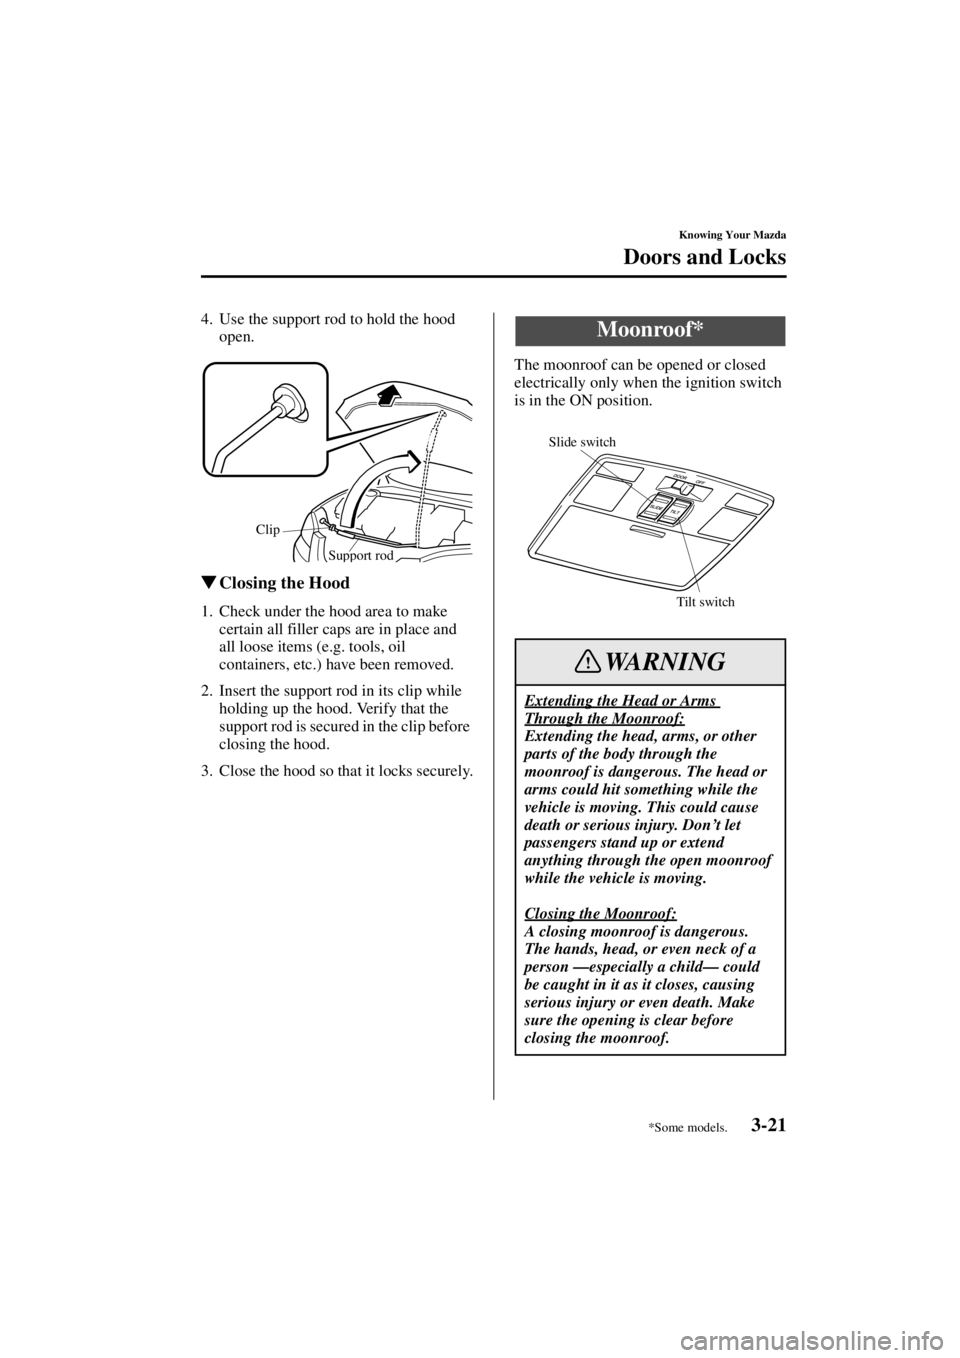 MAZDA MODEL 3 5-DOOR 2004 Service Manual 3-21
Knowing Your Mazda
Doors and Locks
Form No. 8S18-EA-03I
4. Use the support rod to hold the hood open.
Closing the Hood
1. Check under the hood area to make 
certain all filler caps are in place 